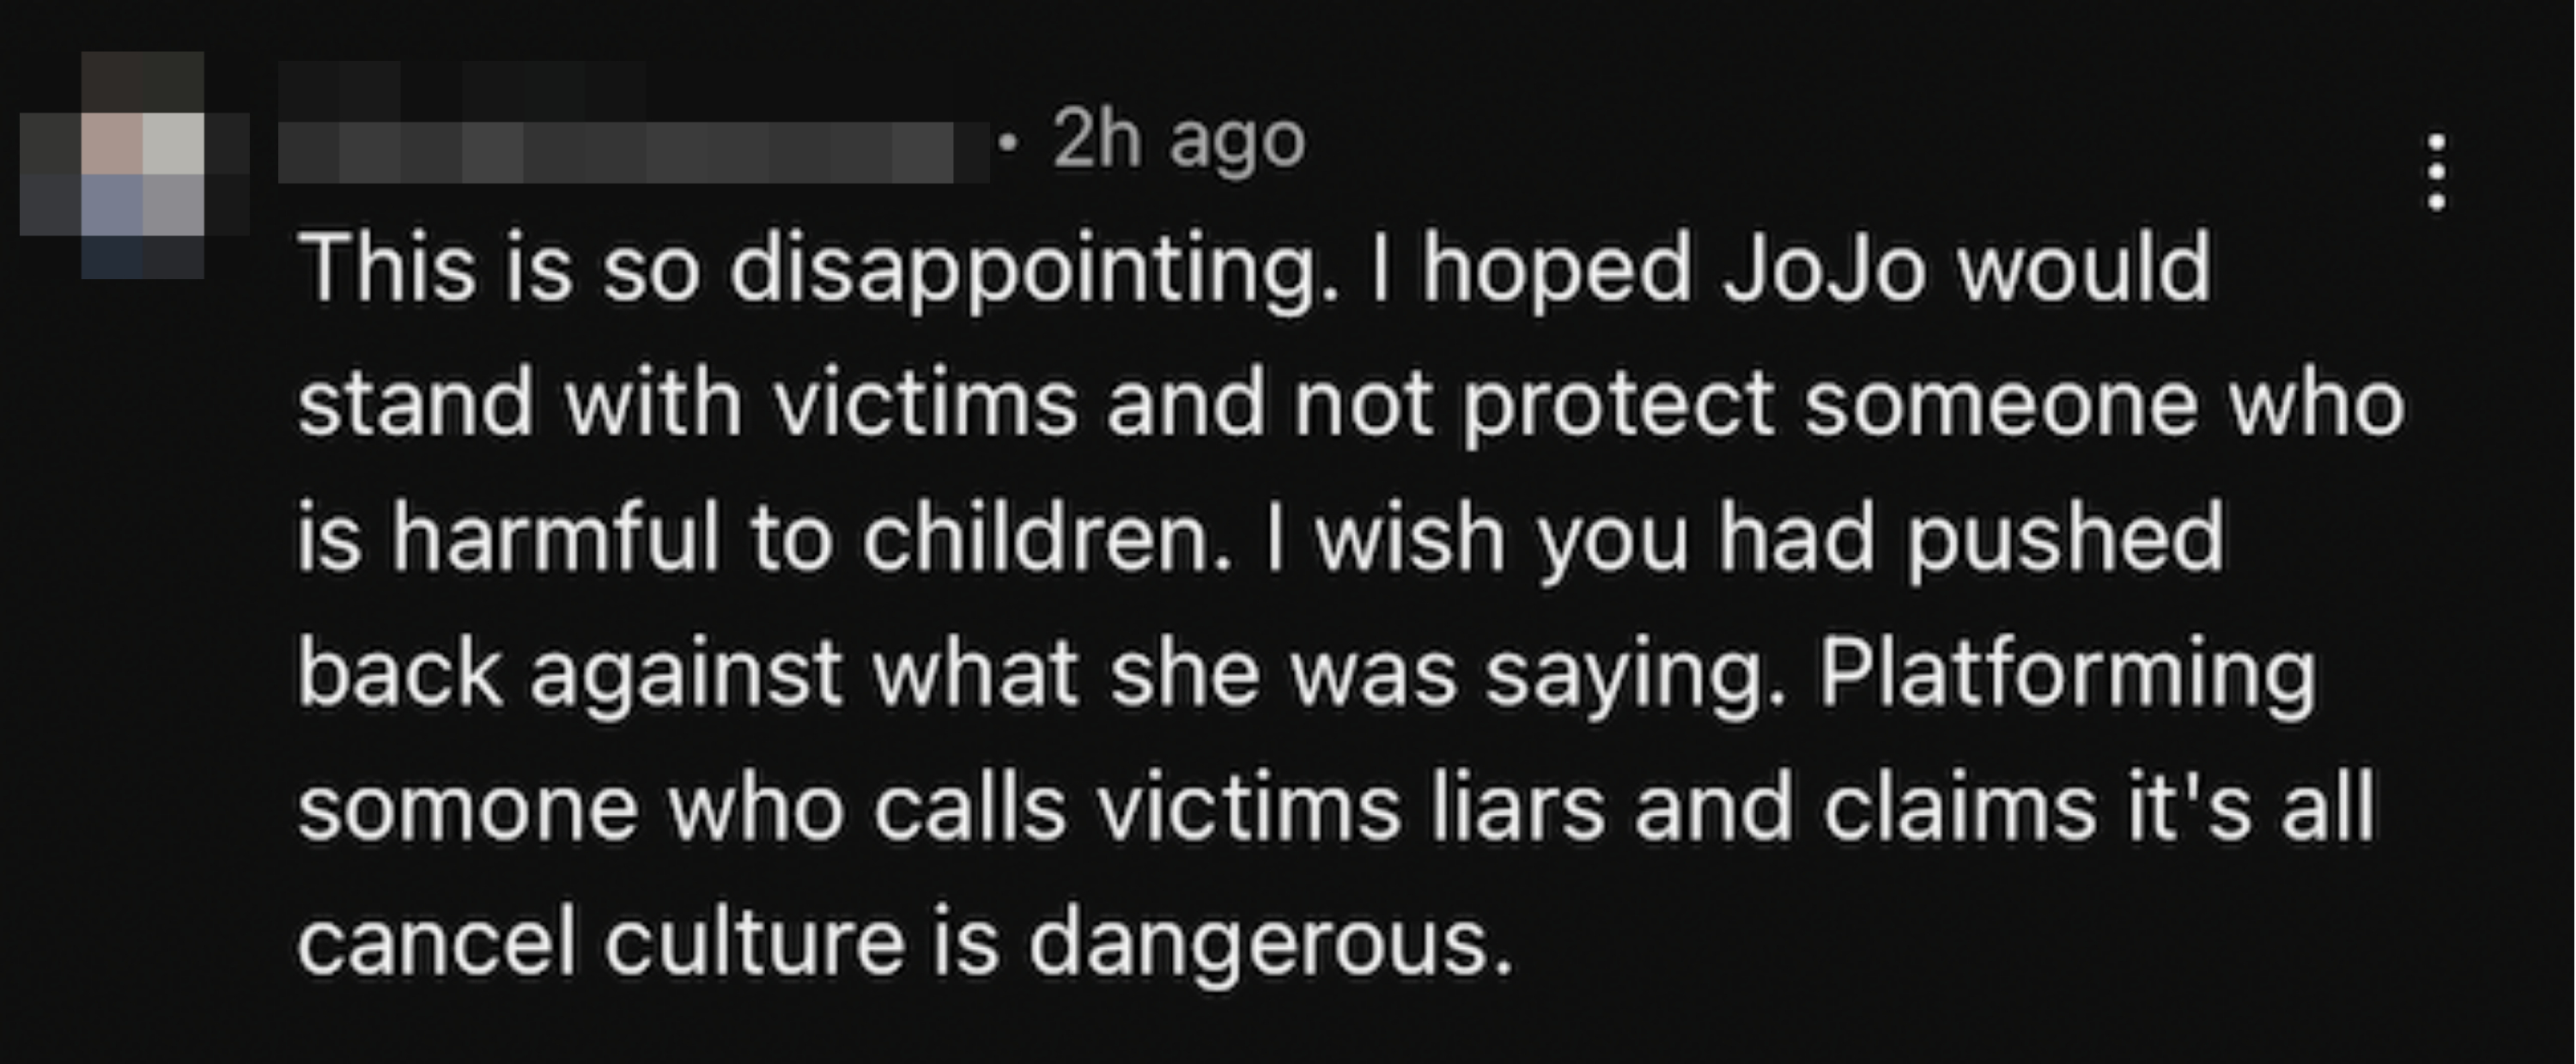 &quot;This is so disappointing. I hoped JoJo would stand with victims and not protect someone who is harmful to children.&quot;